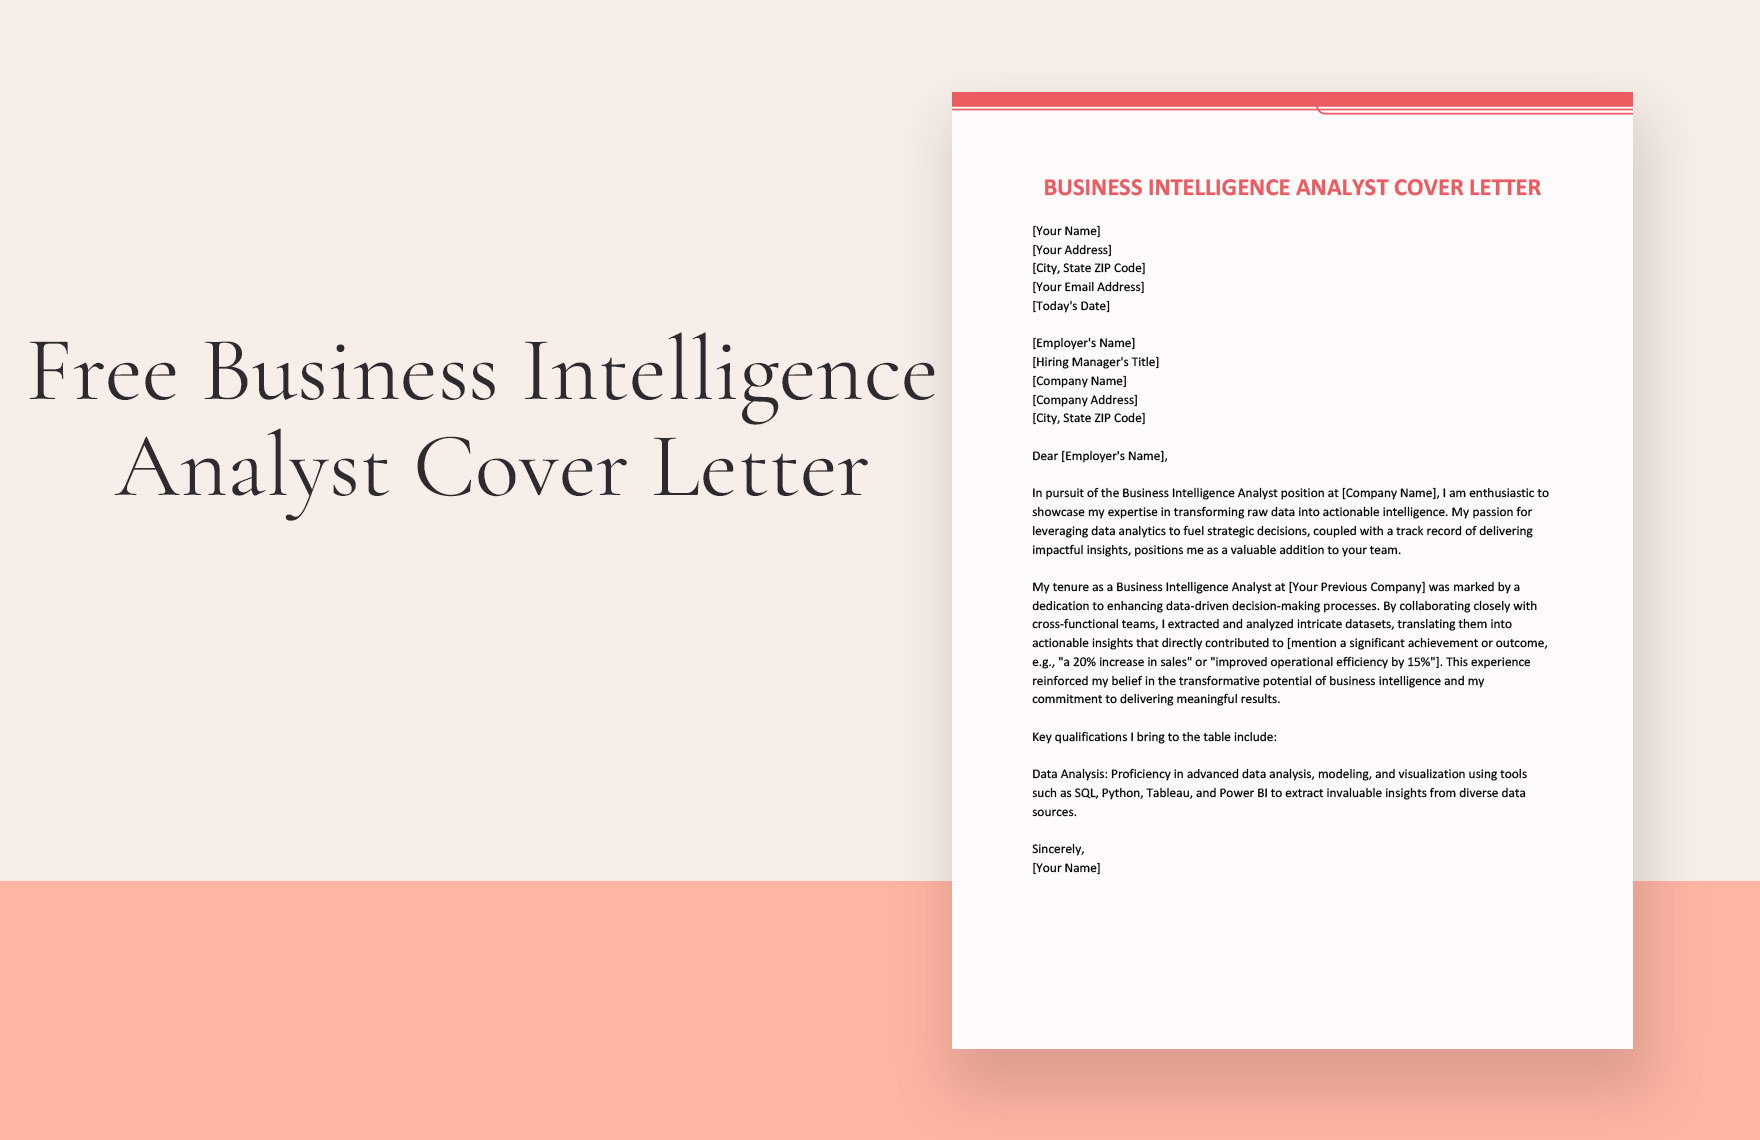 Business Intelligence Analyst Cover Letter in Word, Google Docs